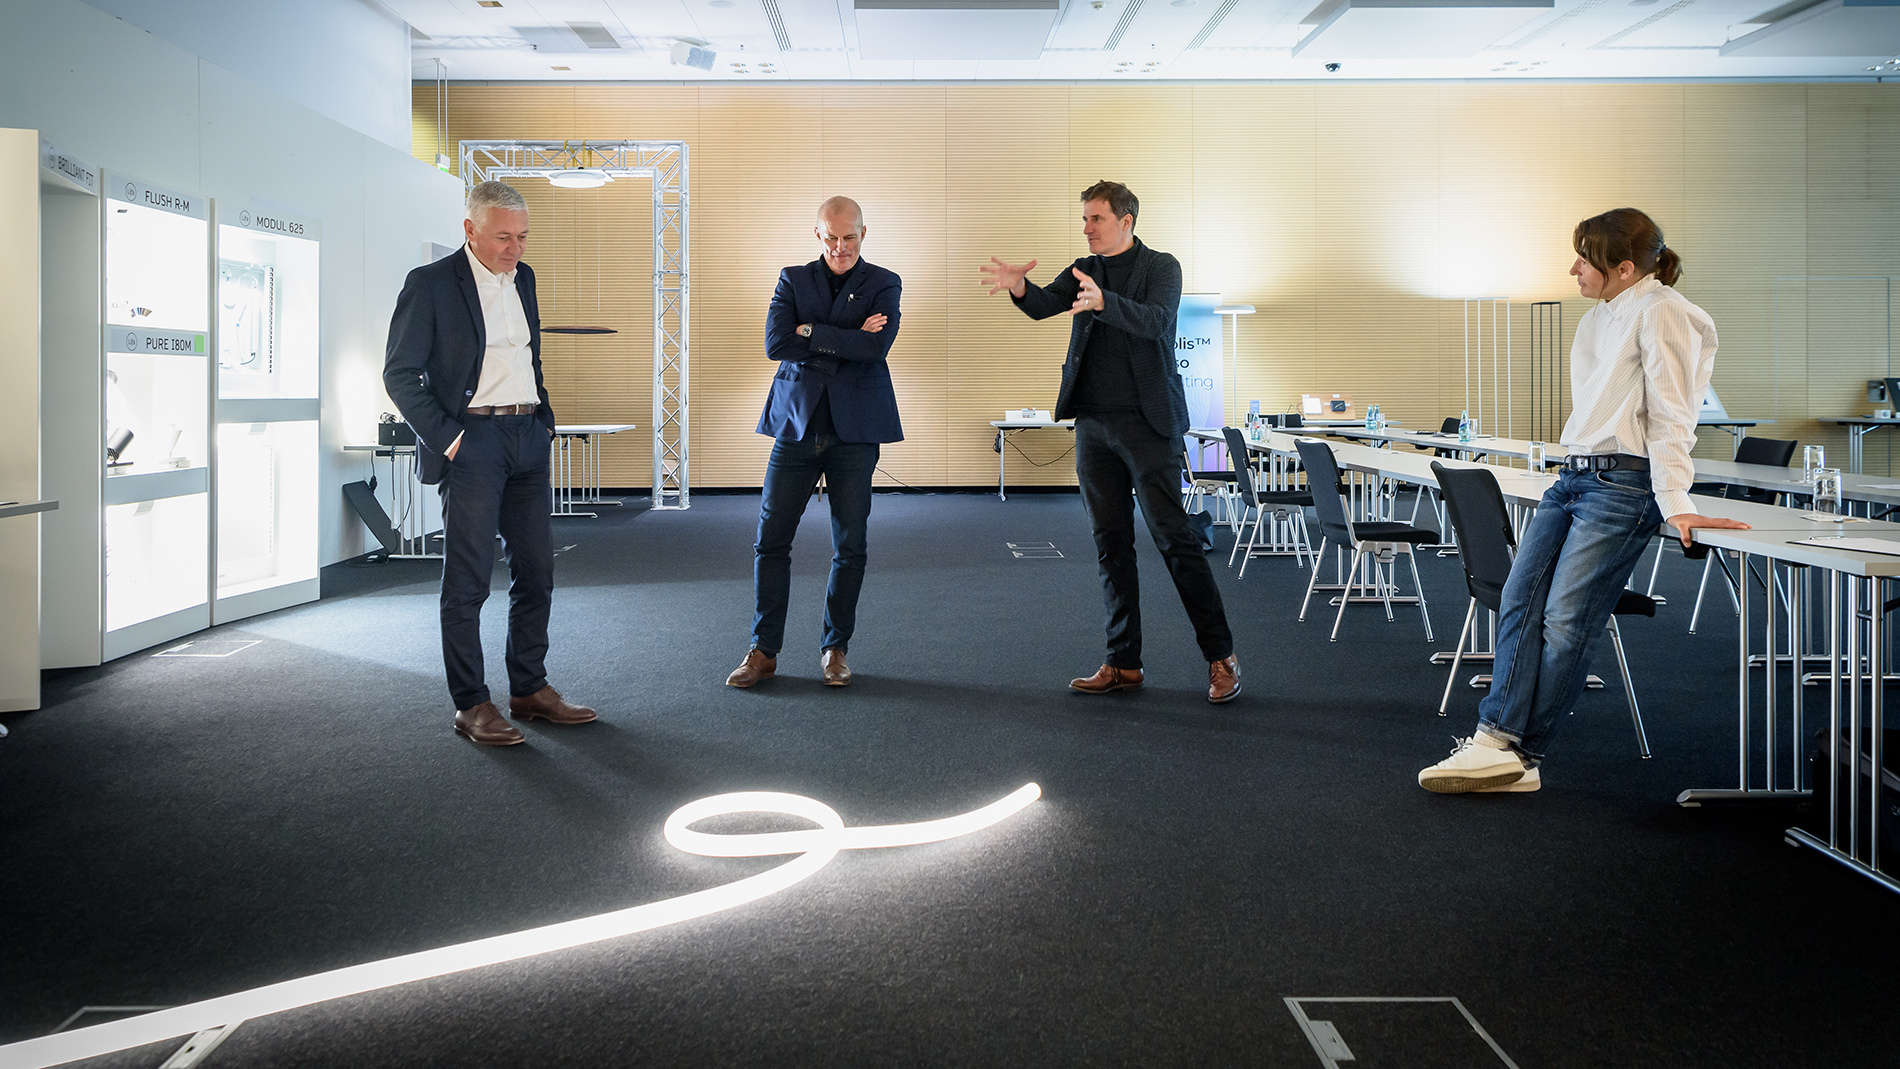 (From right to left) Judges Catrin Brändle-Wigand, Christian Simons, Julian Andreas Schoyerer and Matthias Koch discuss the 39 products entered for the Architecture+Technology Innovation Award  (Source: AIT – Moritz Bernoully)